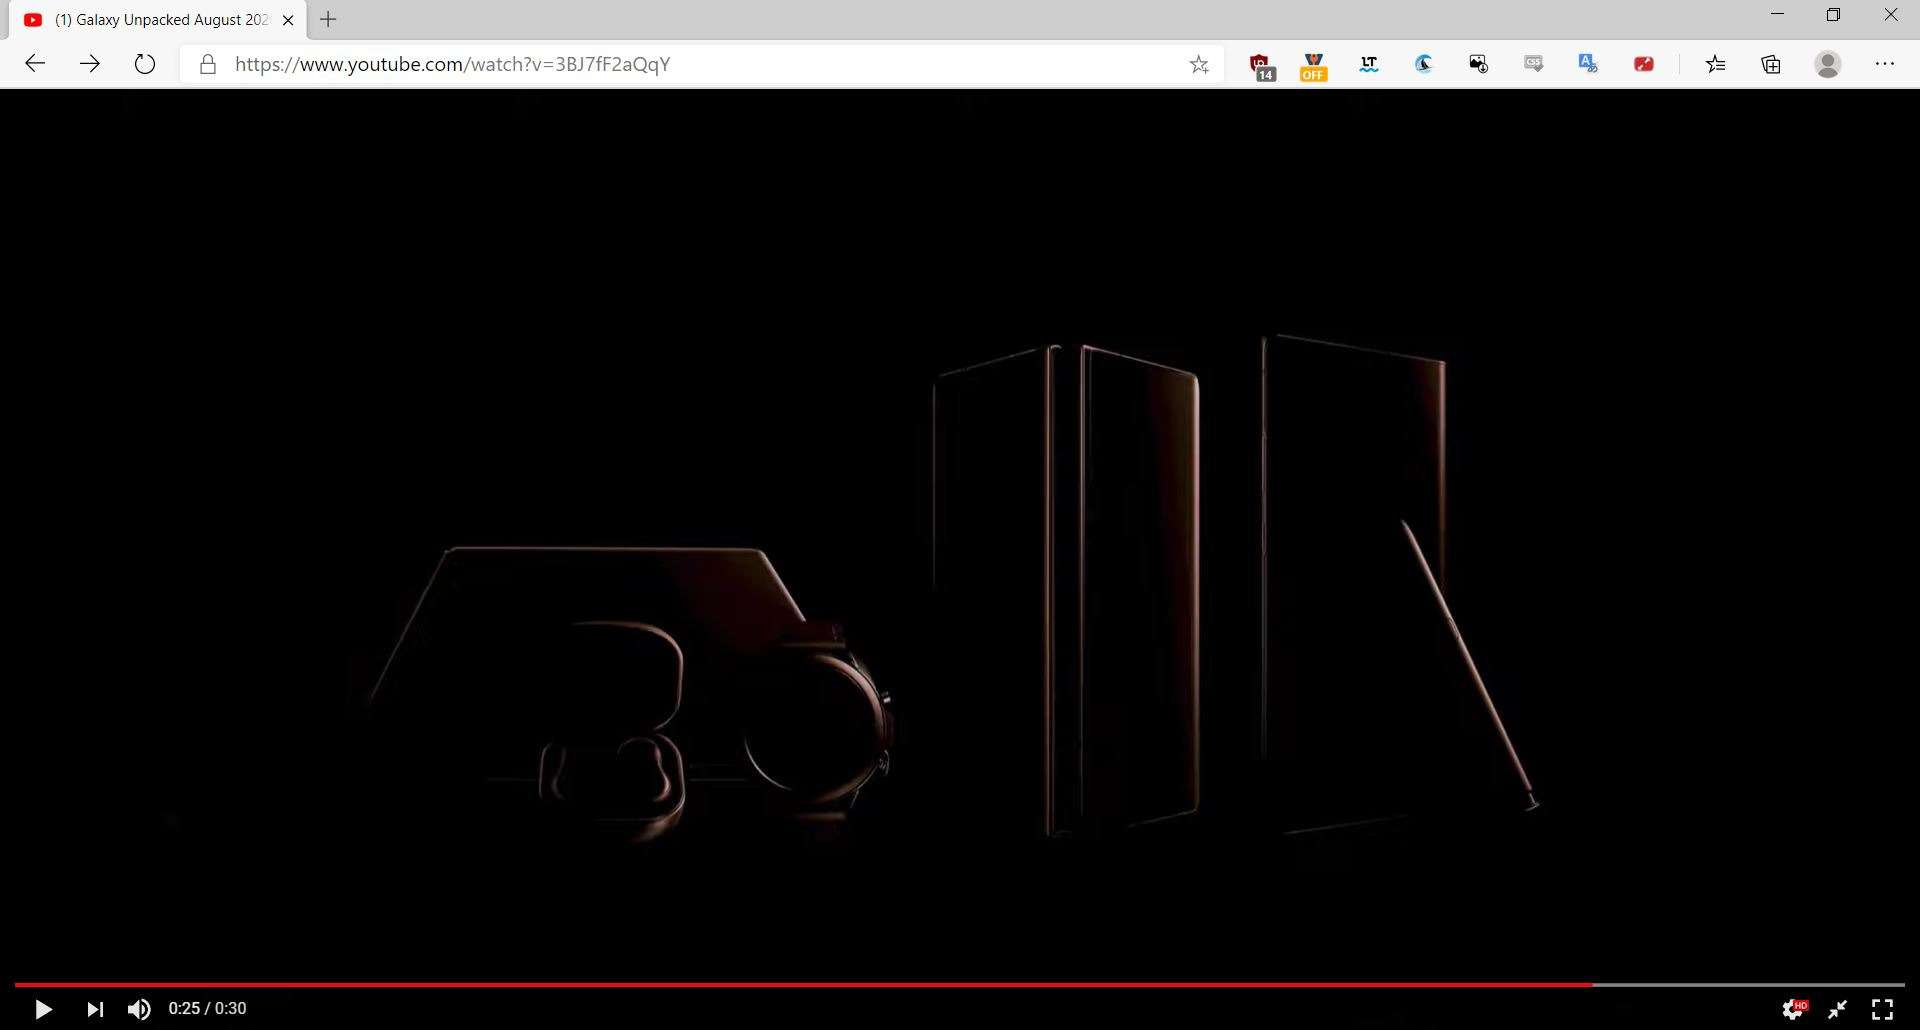 YouTube Windowed FullScreen is an extension for Firefox and Chrome that plays full screen videos in windowed mode